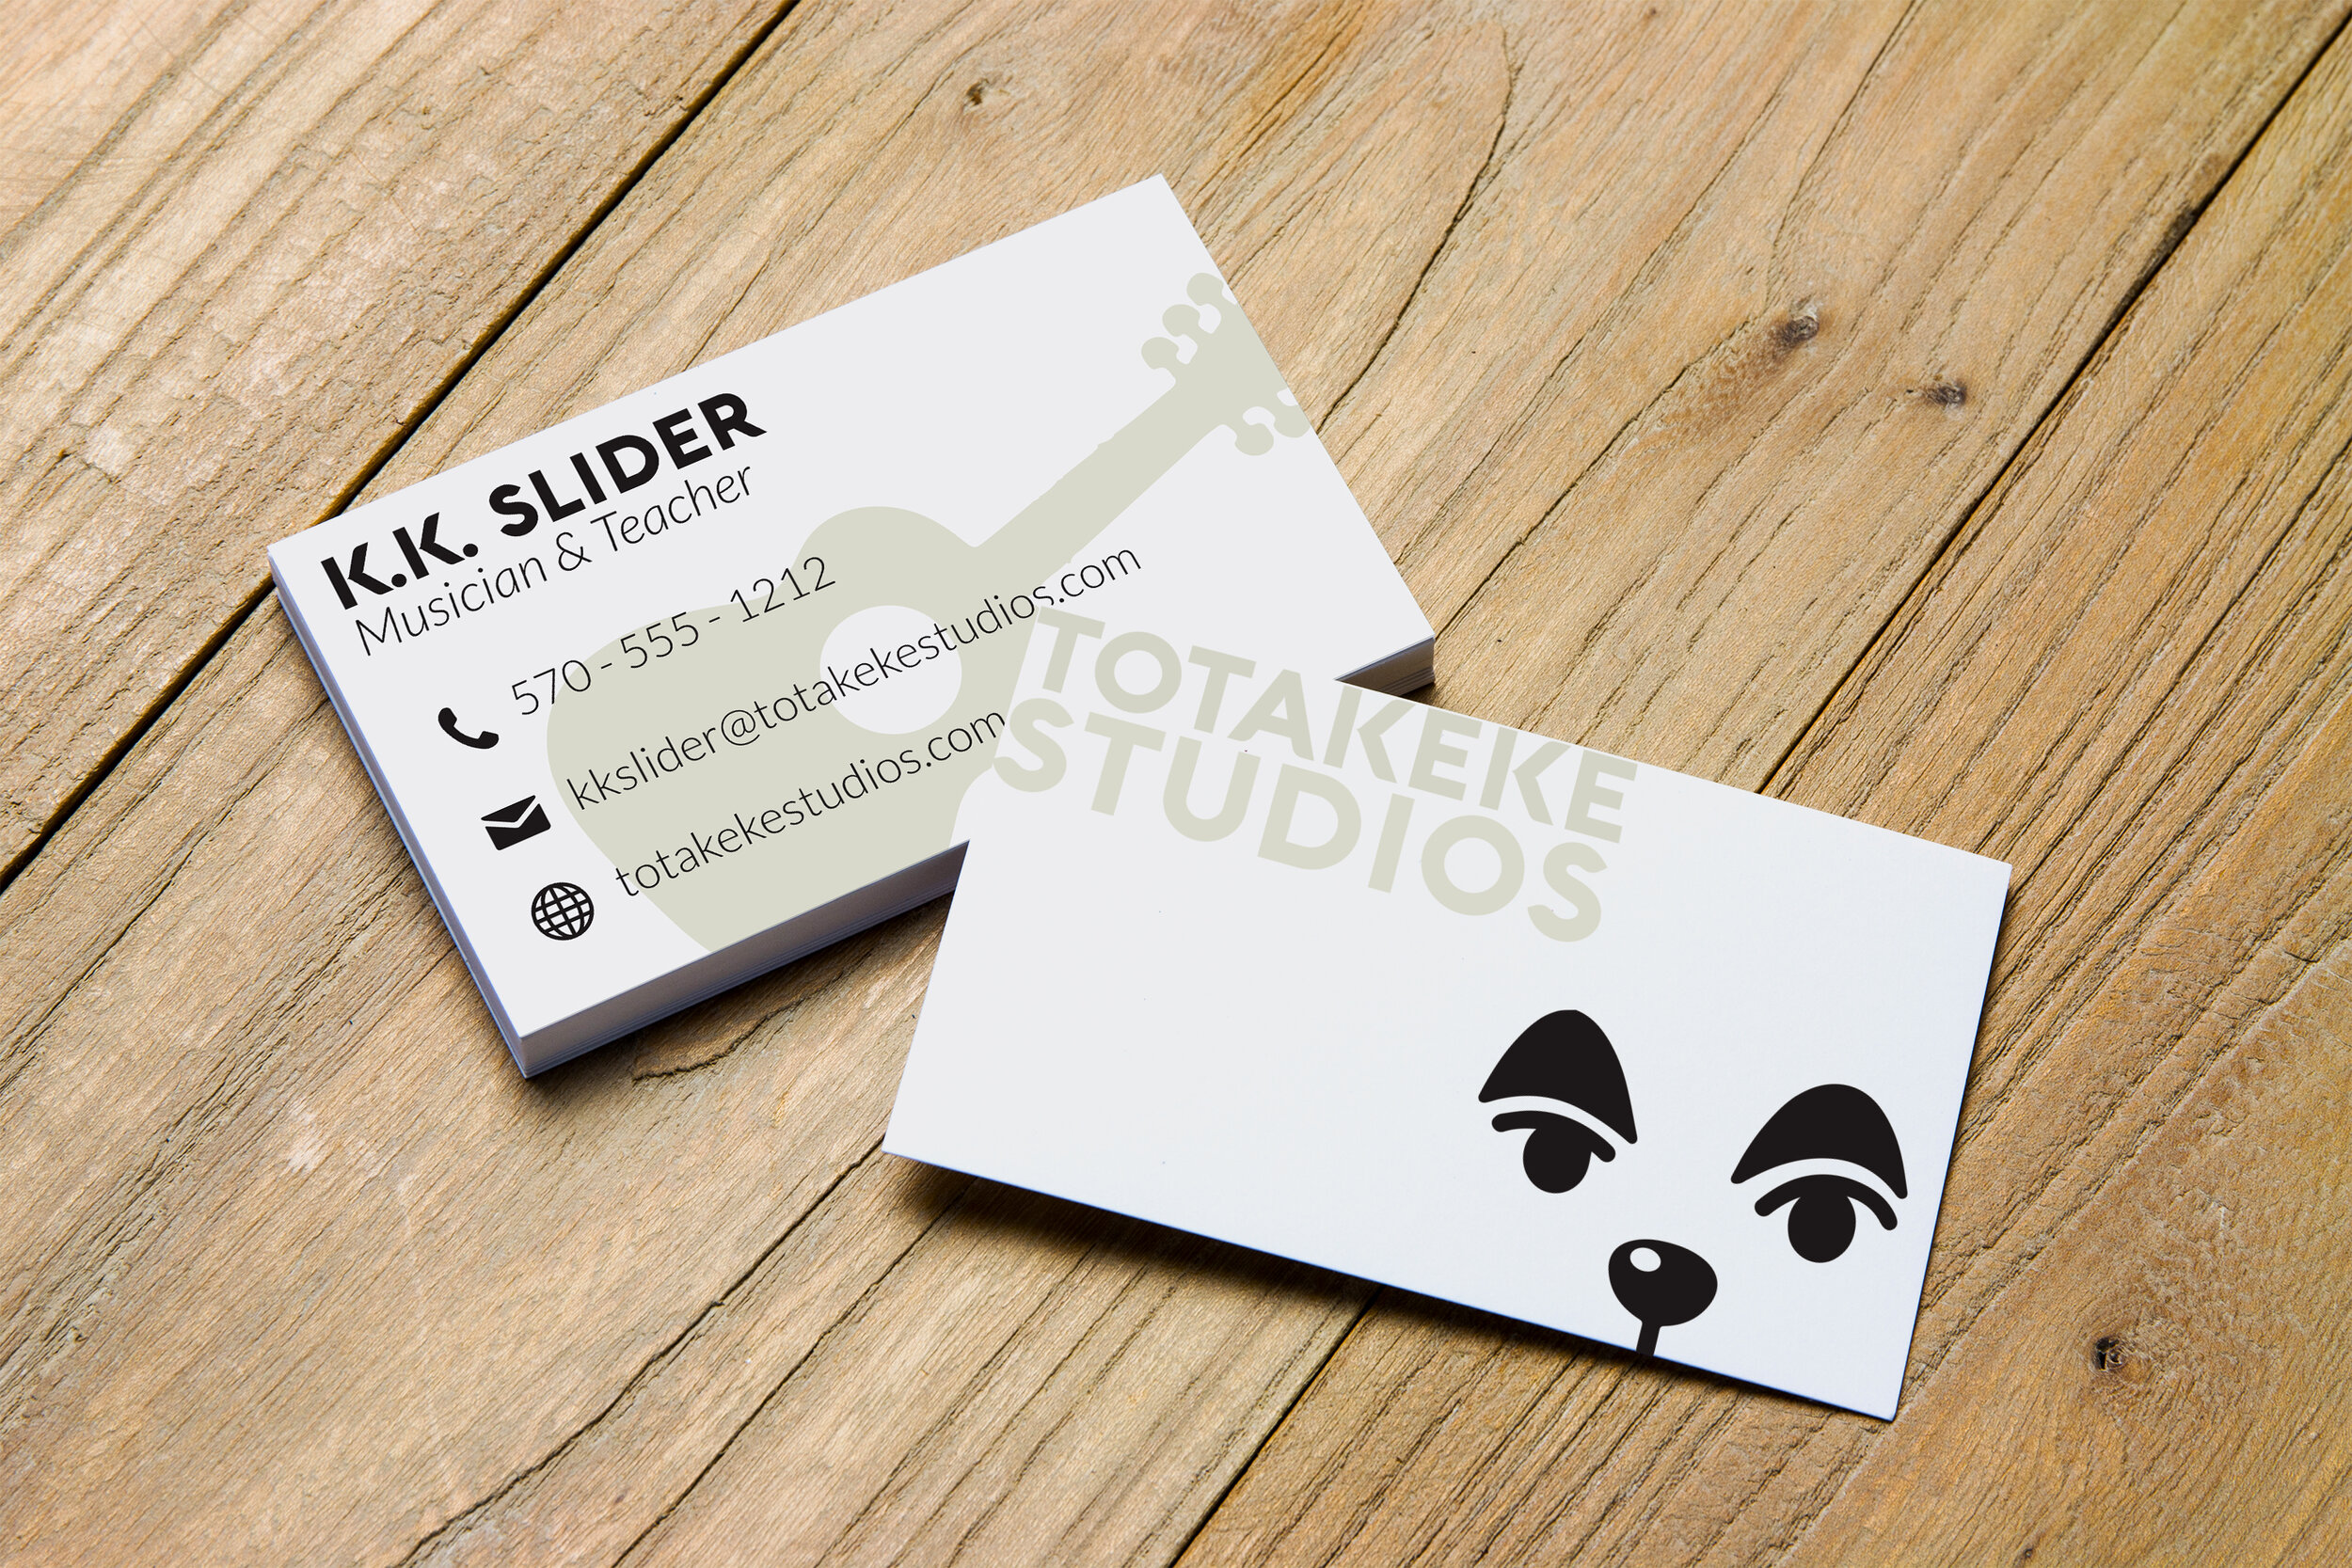 Video Game Developers Business Card